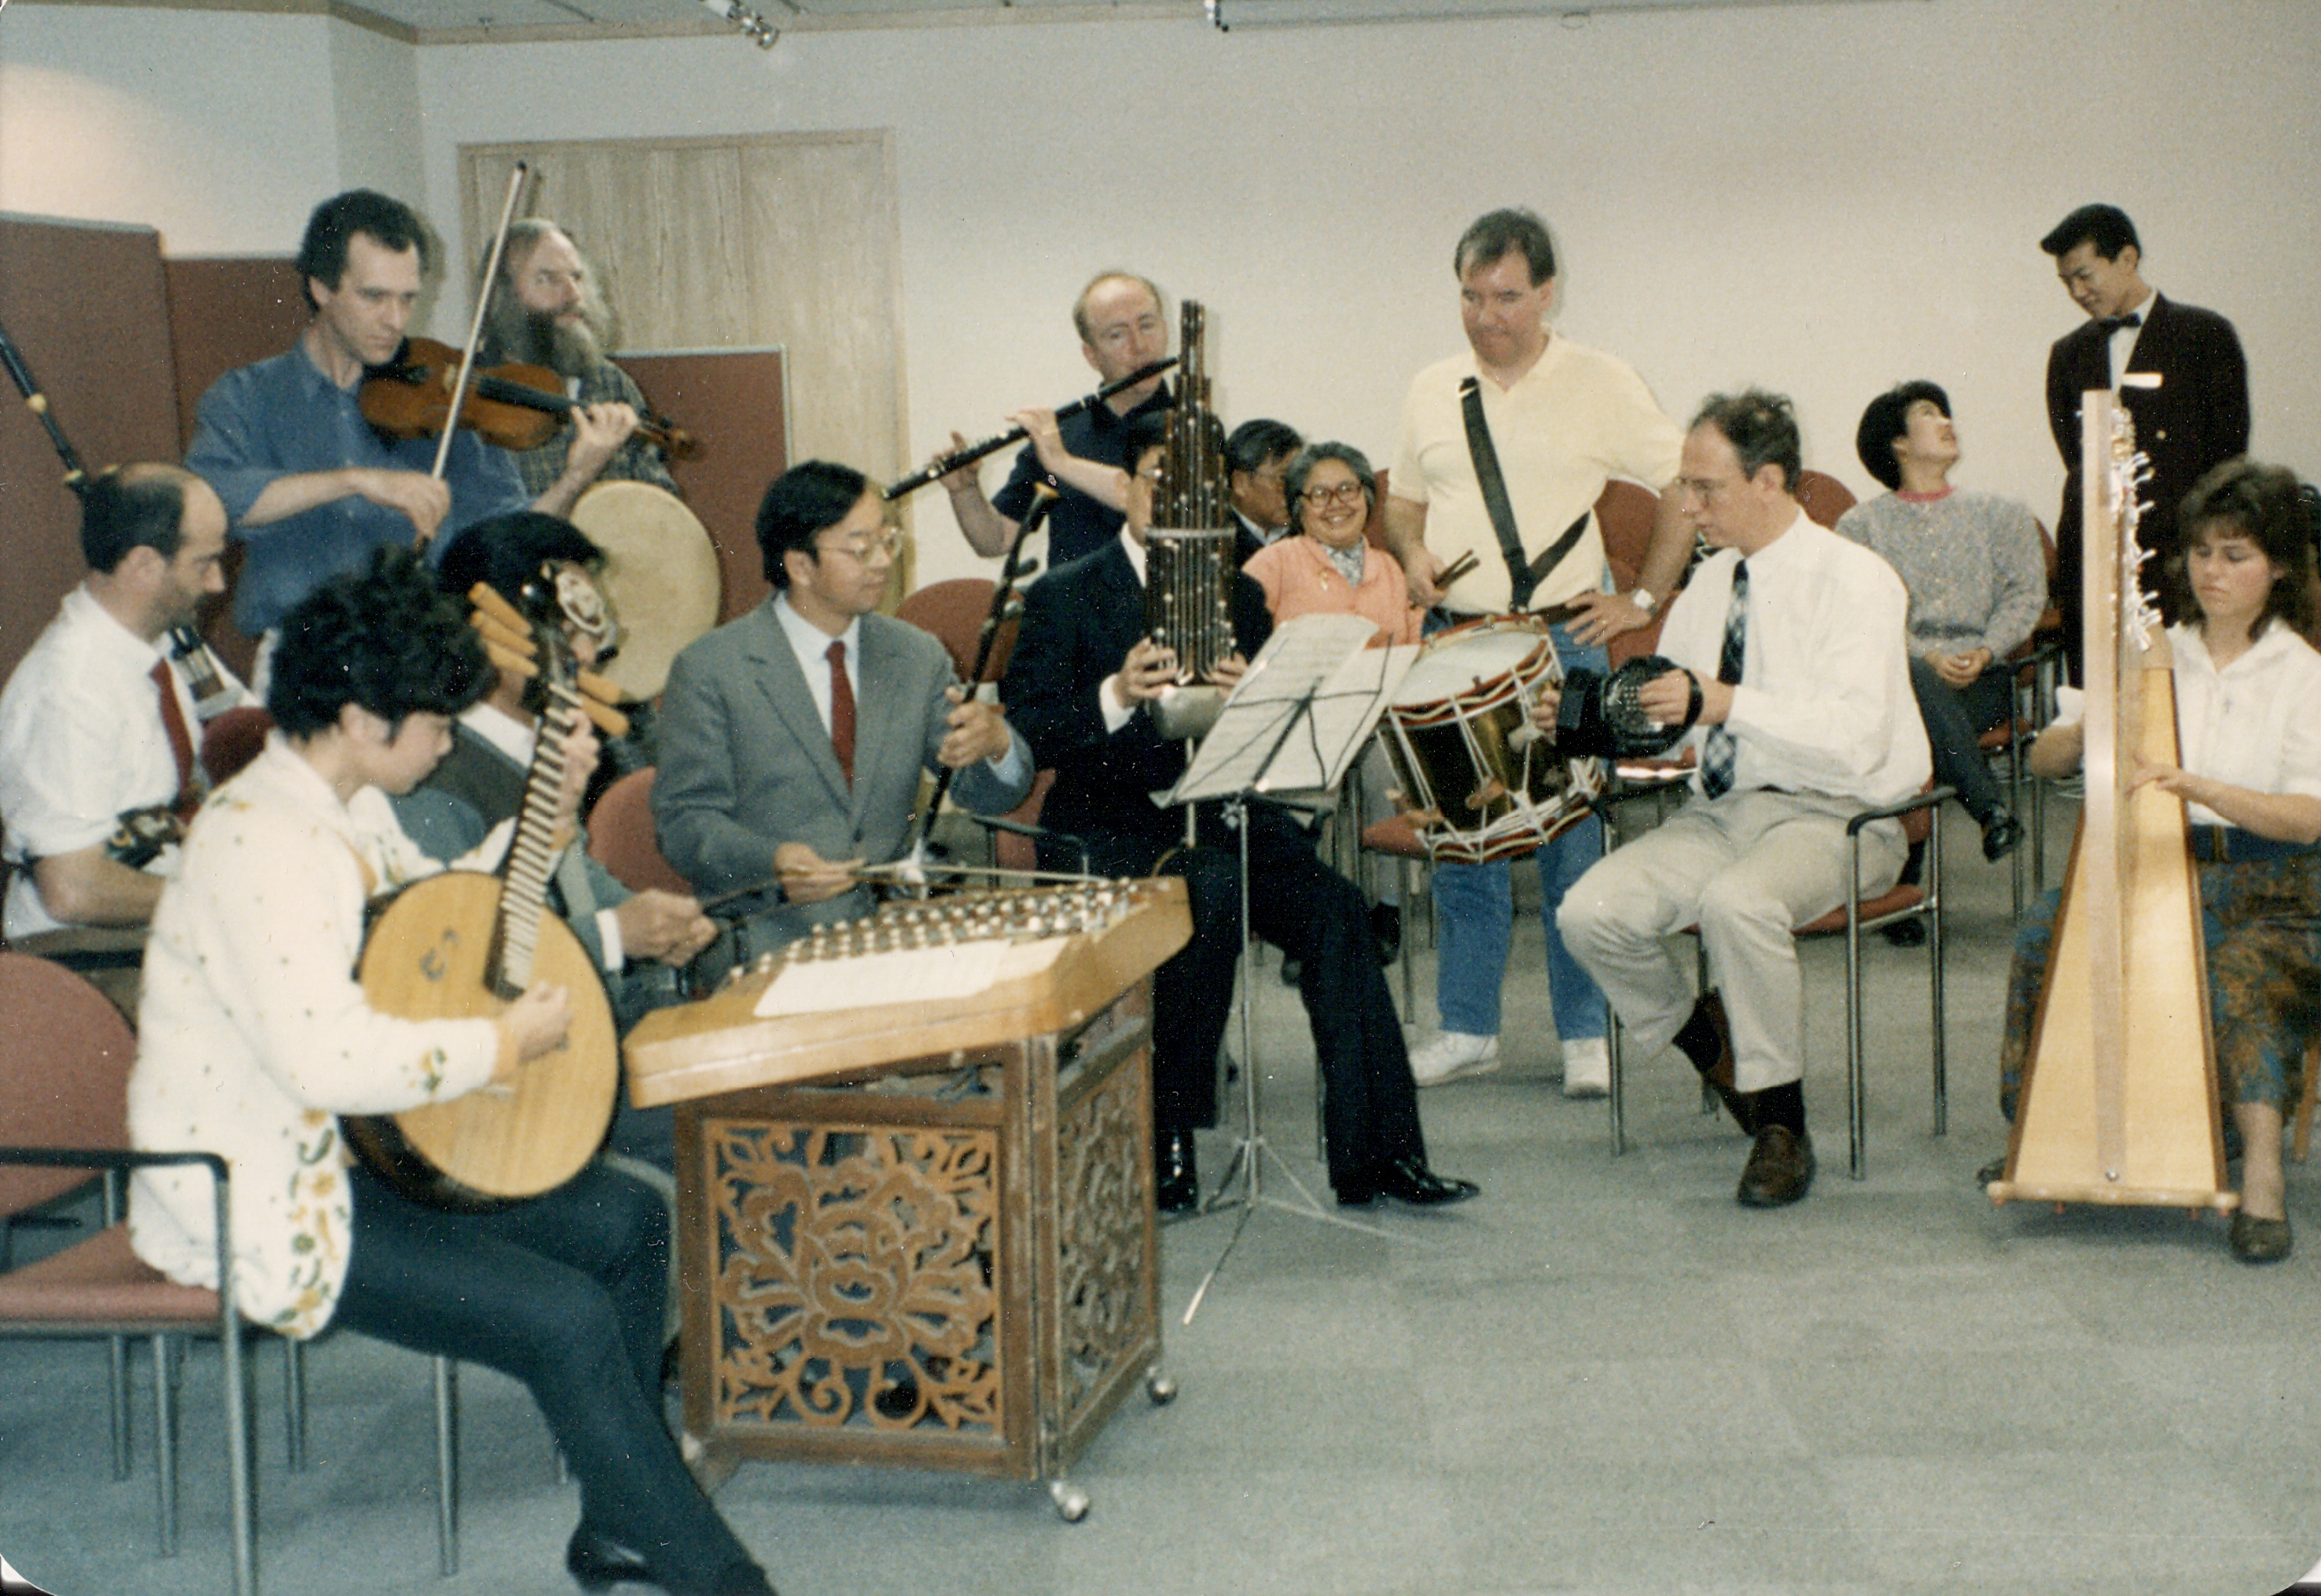 Chinese musicians & The Whistlebinkies play in Beijing in November 1991 during our tour